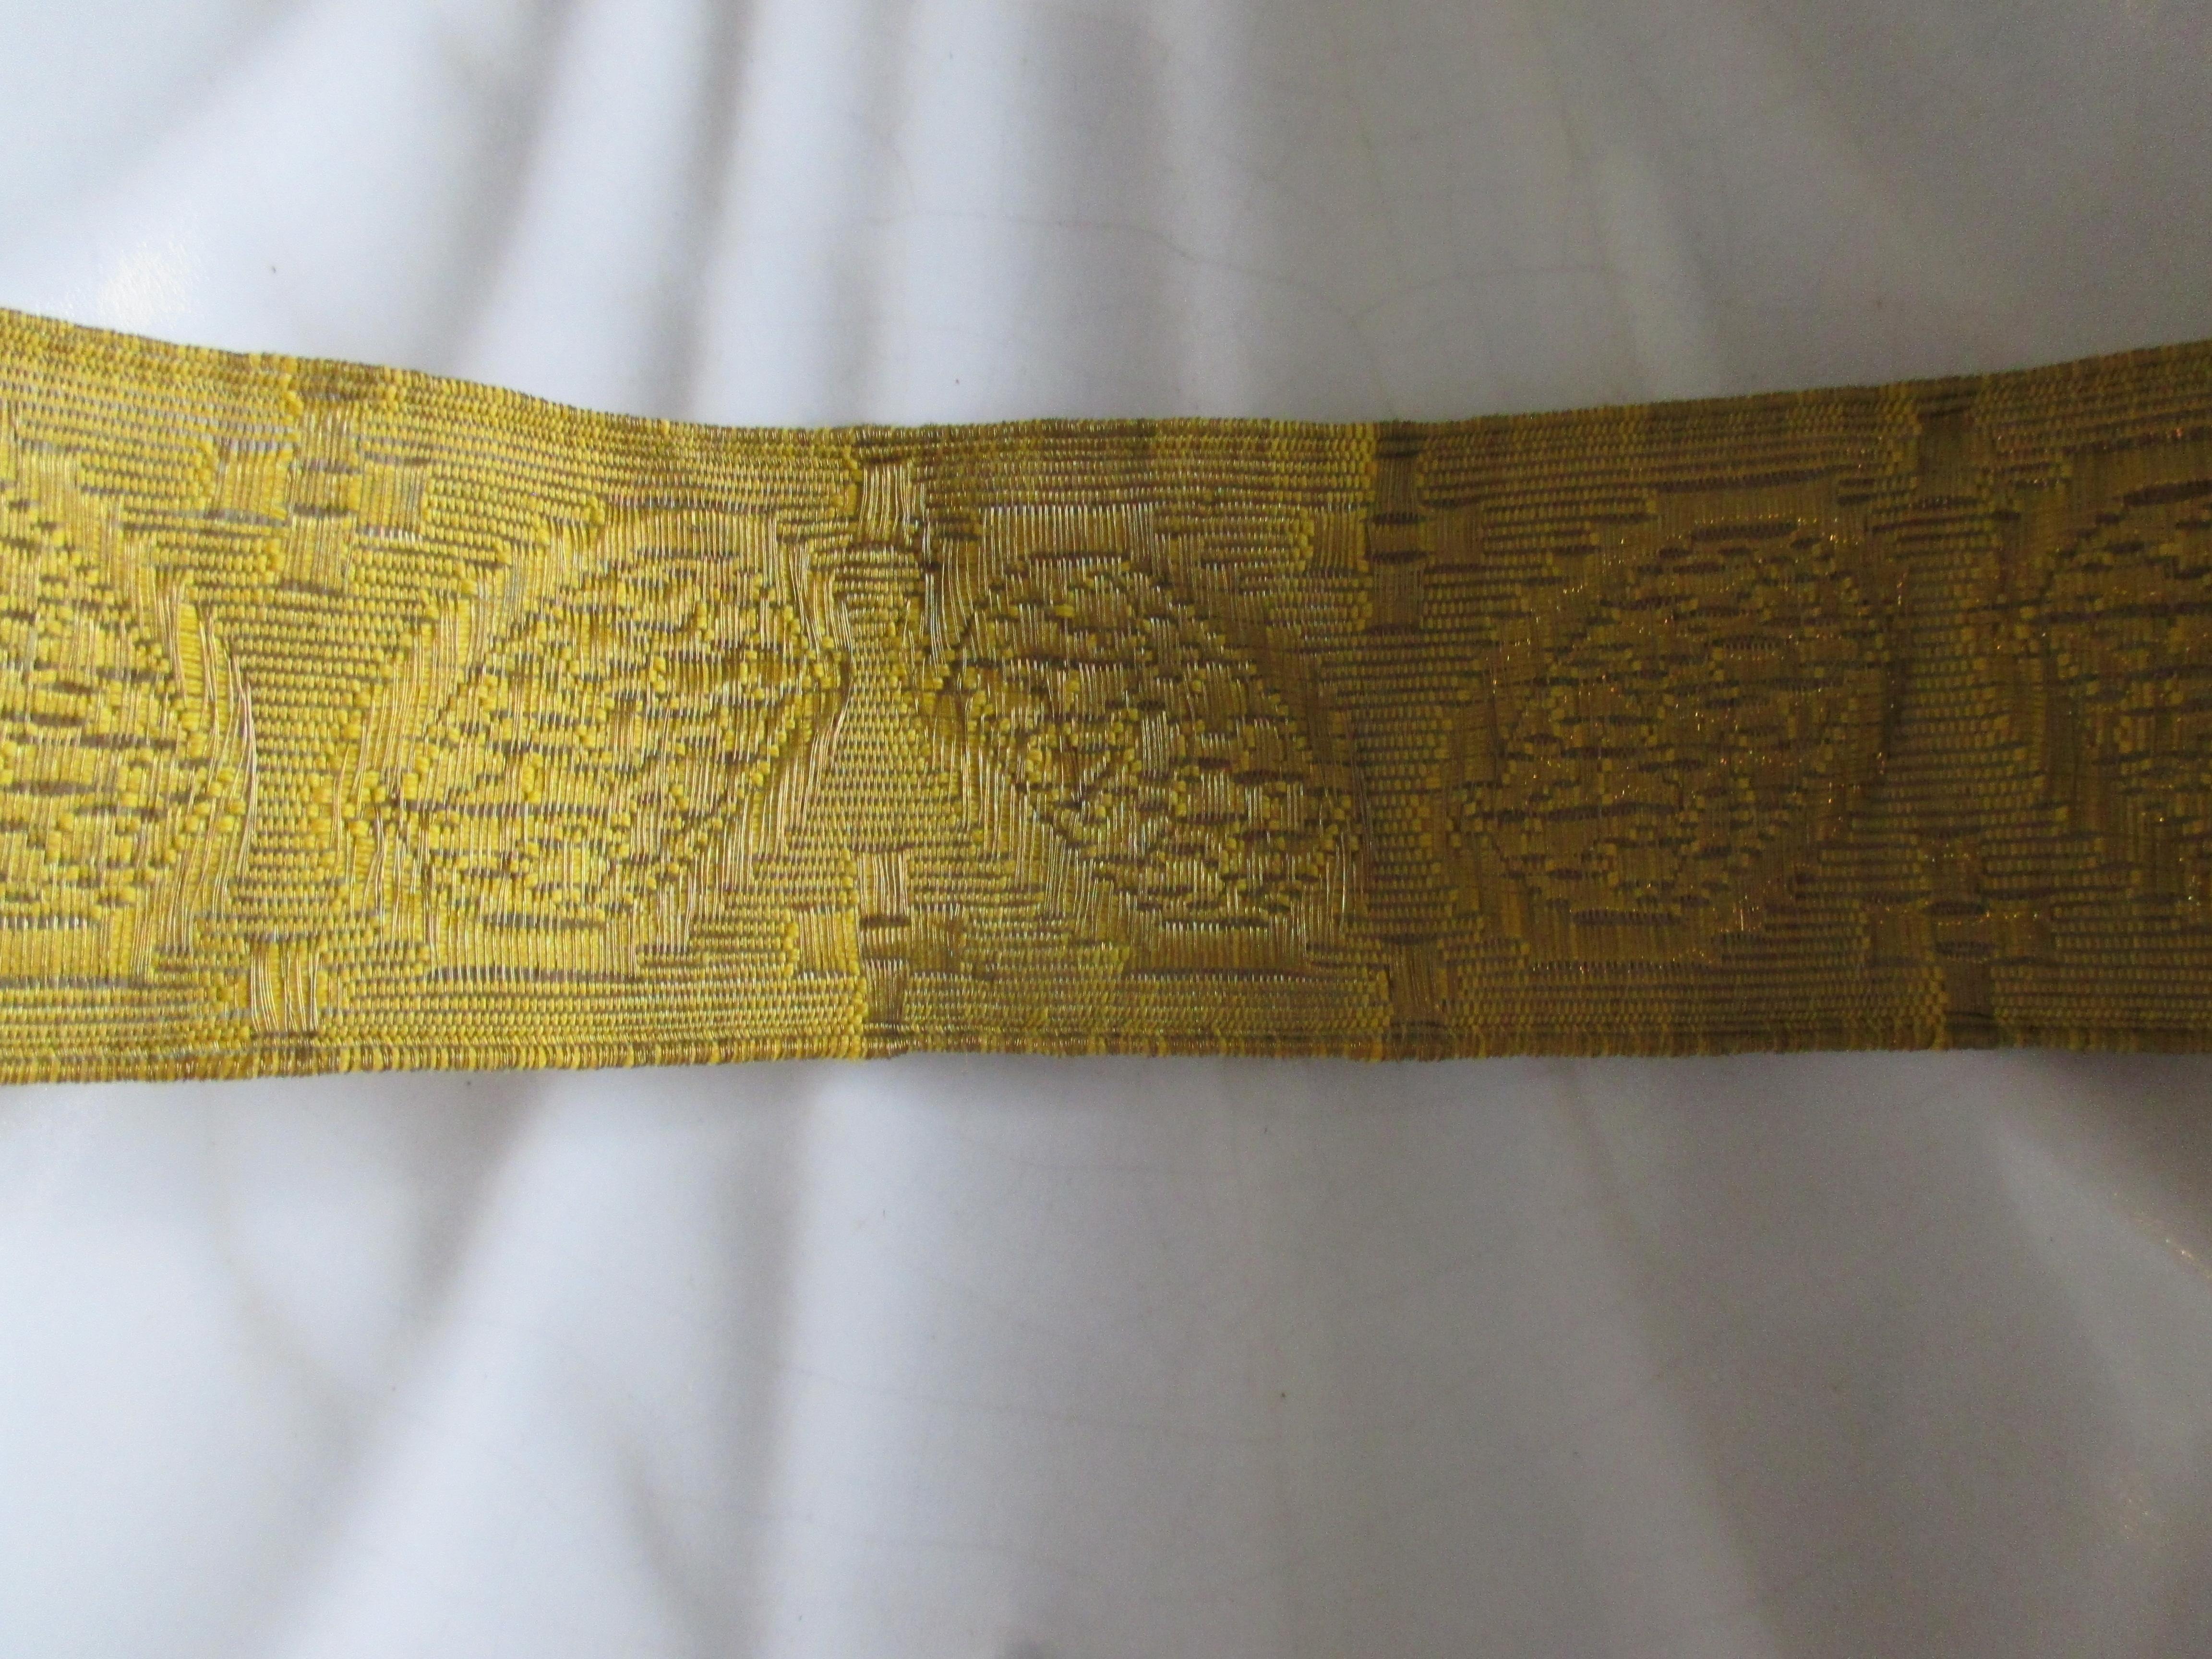 French Antique Gold Metallic Threads Decorative Trim with High Relief